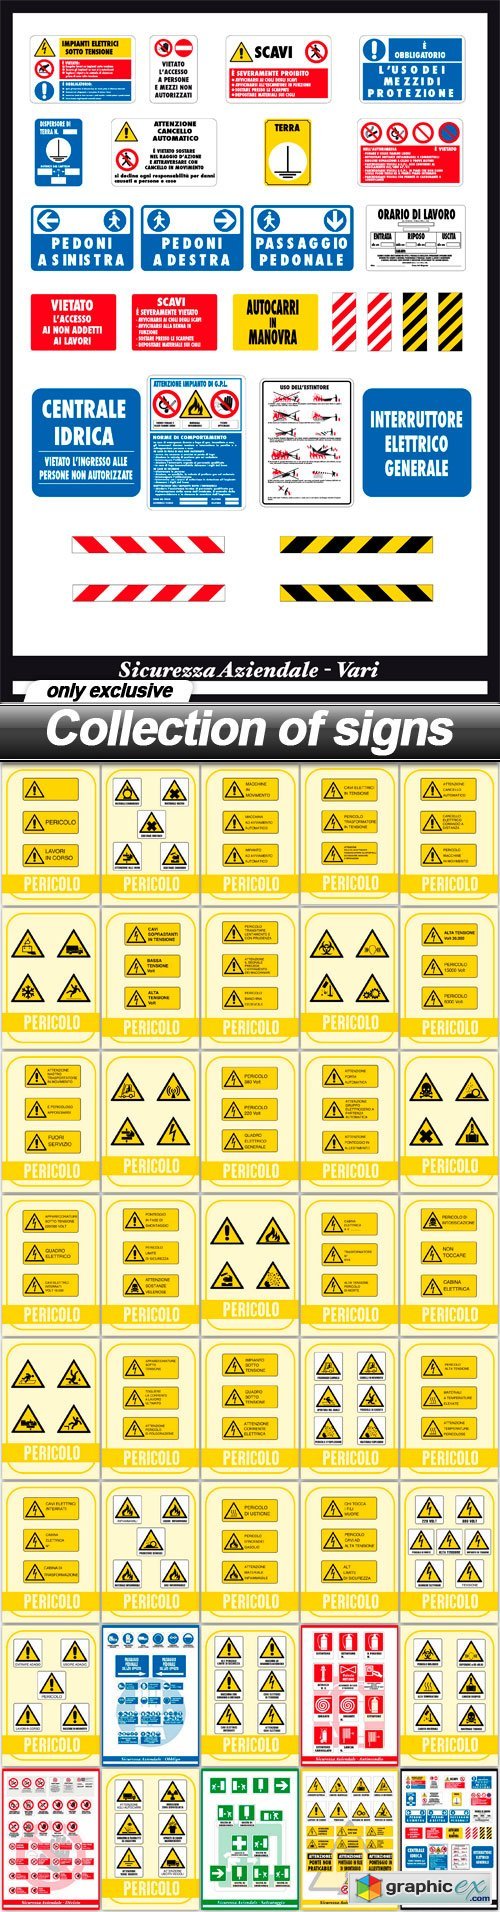 Collection of signs - 40 EPS